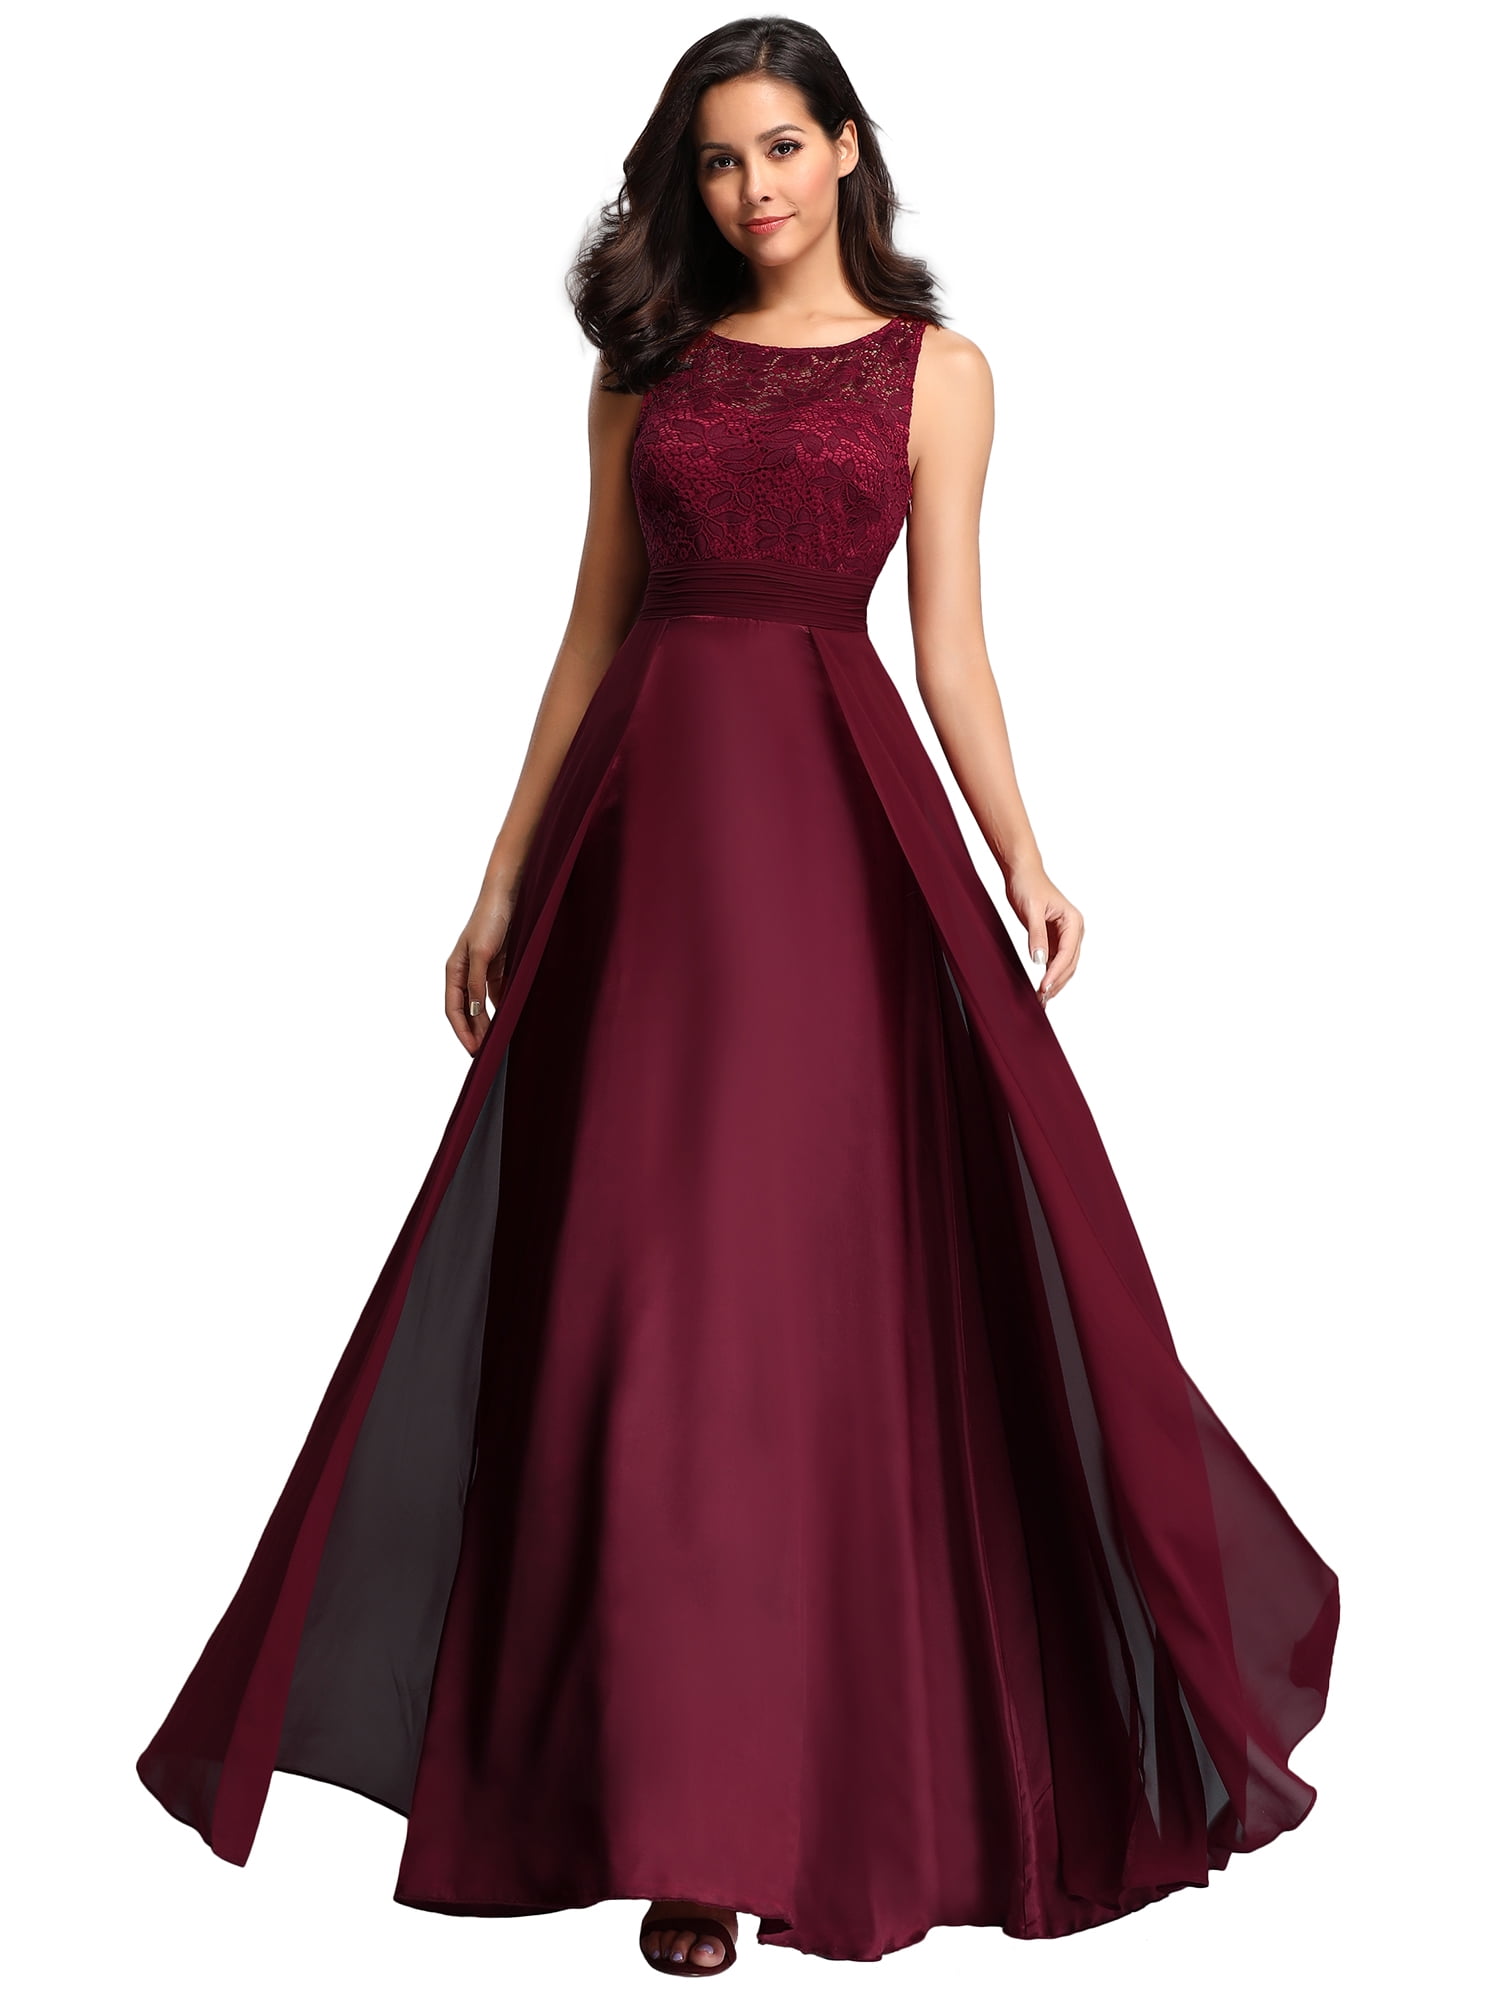 Womens Long Formal Dresses With Jackets : Slantway Plus Size Prom Cocktail Formal Dress For ...